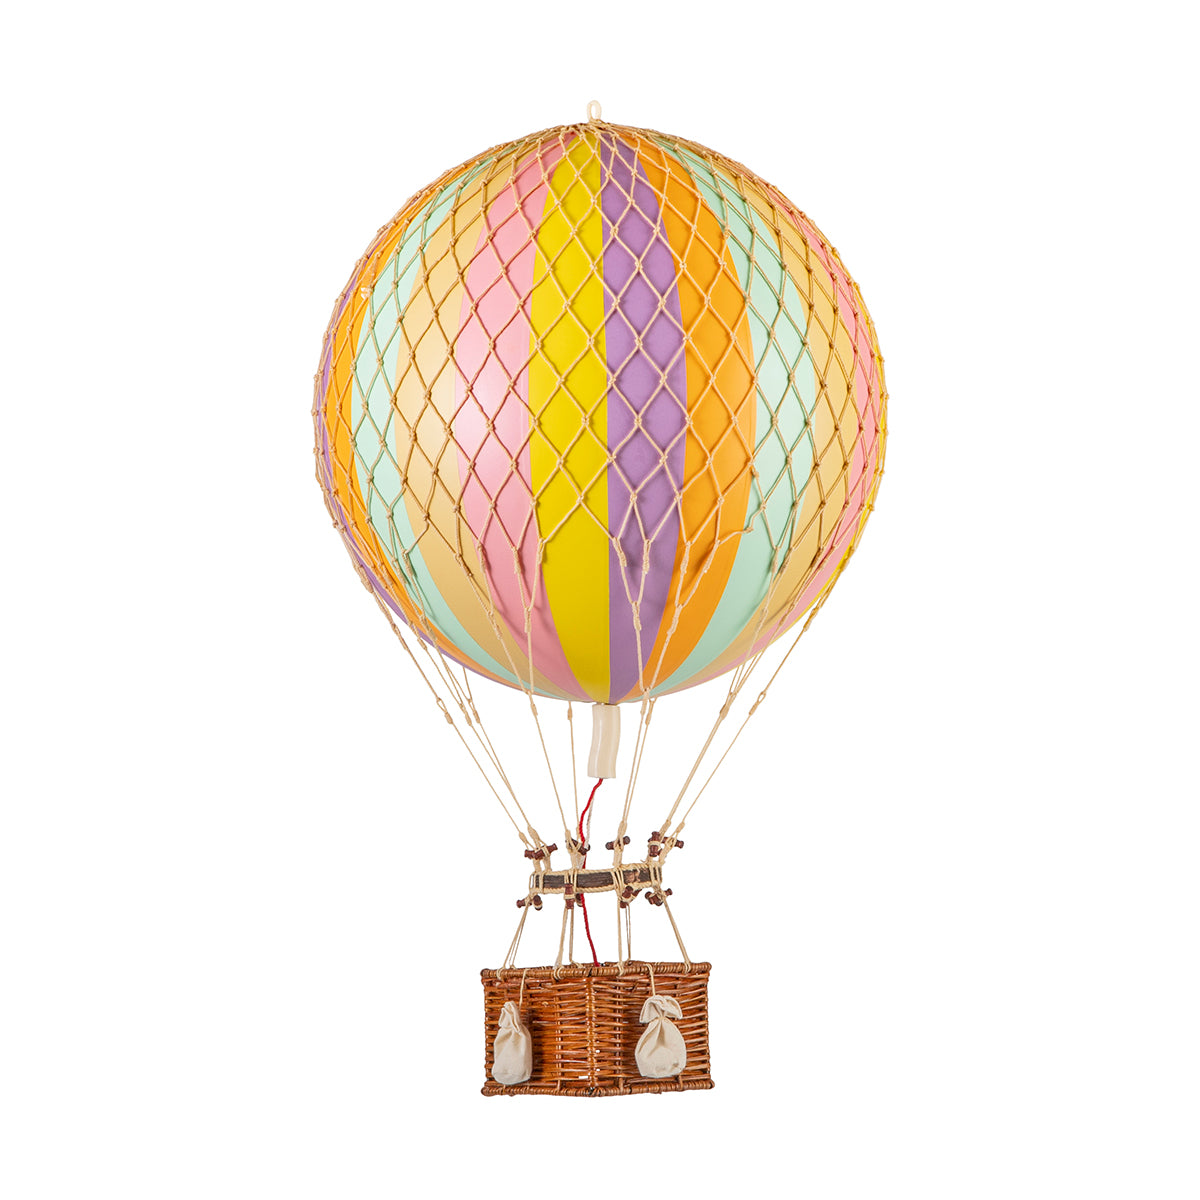 Experience a one-of-a-kind adventure as you soar to new heights in a mesmerizing Wonderen Medium Hot Air Balloon - Royal Aero. From the comfort of the basket, indulge in a unique perspective that allows you to witness breathtaking landscapes.